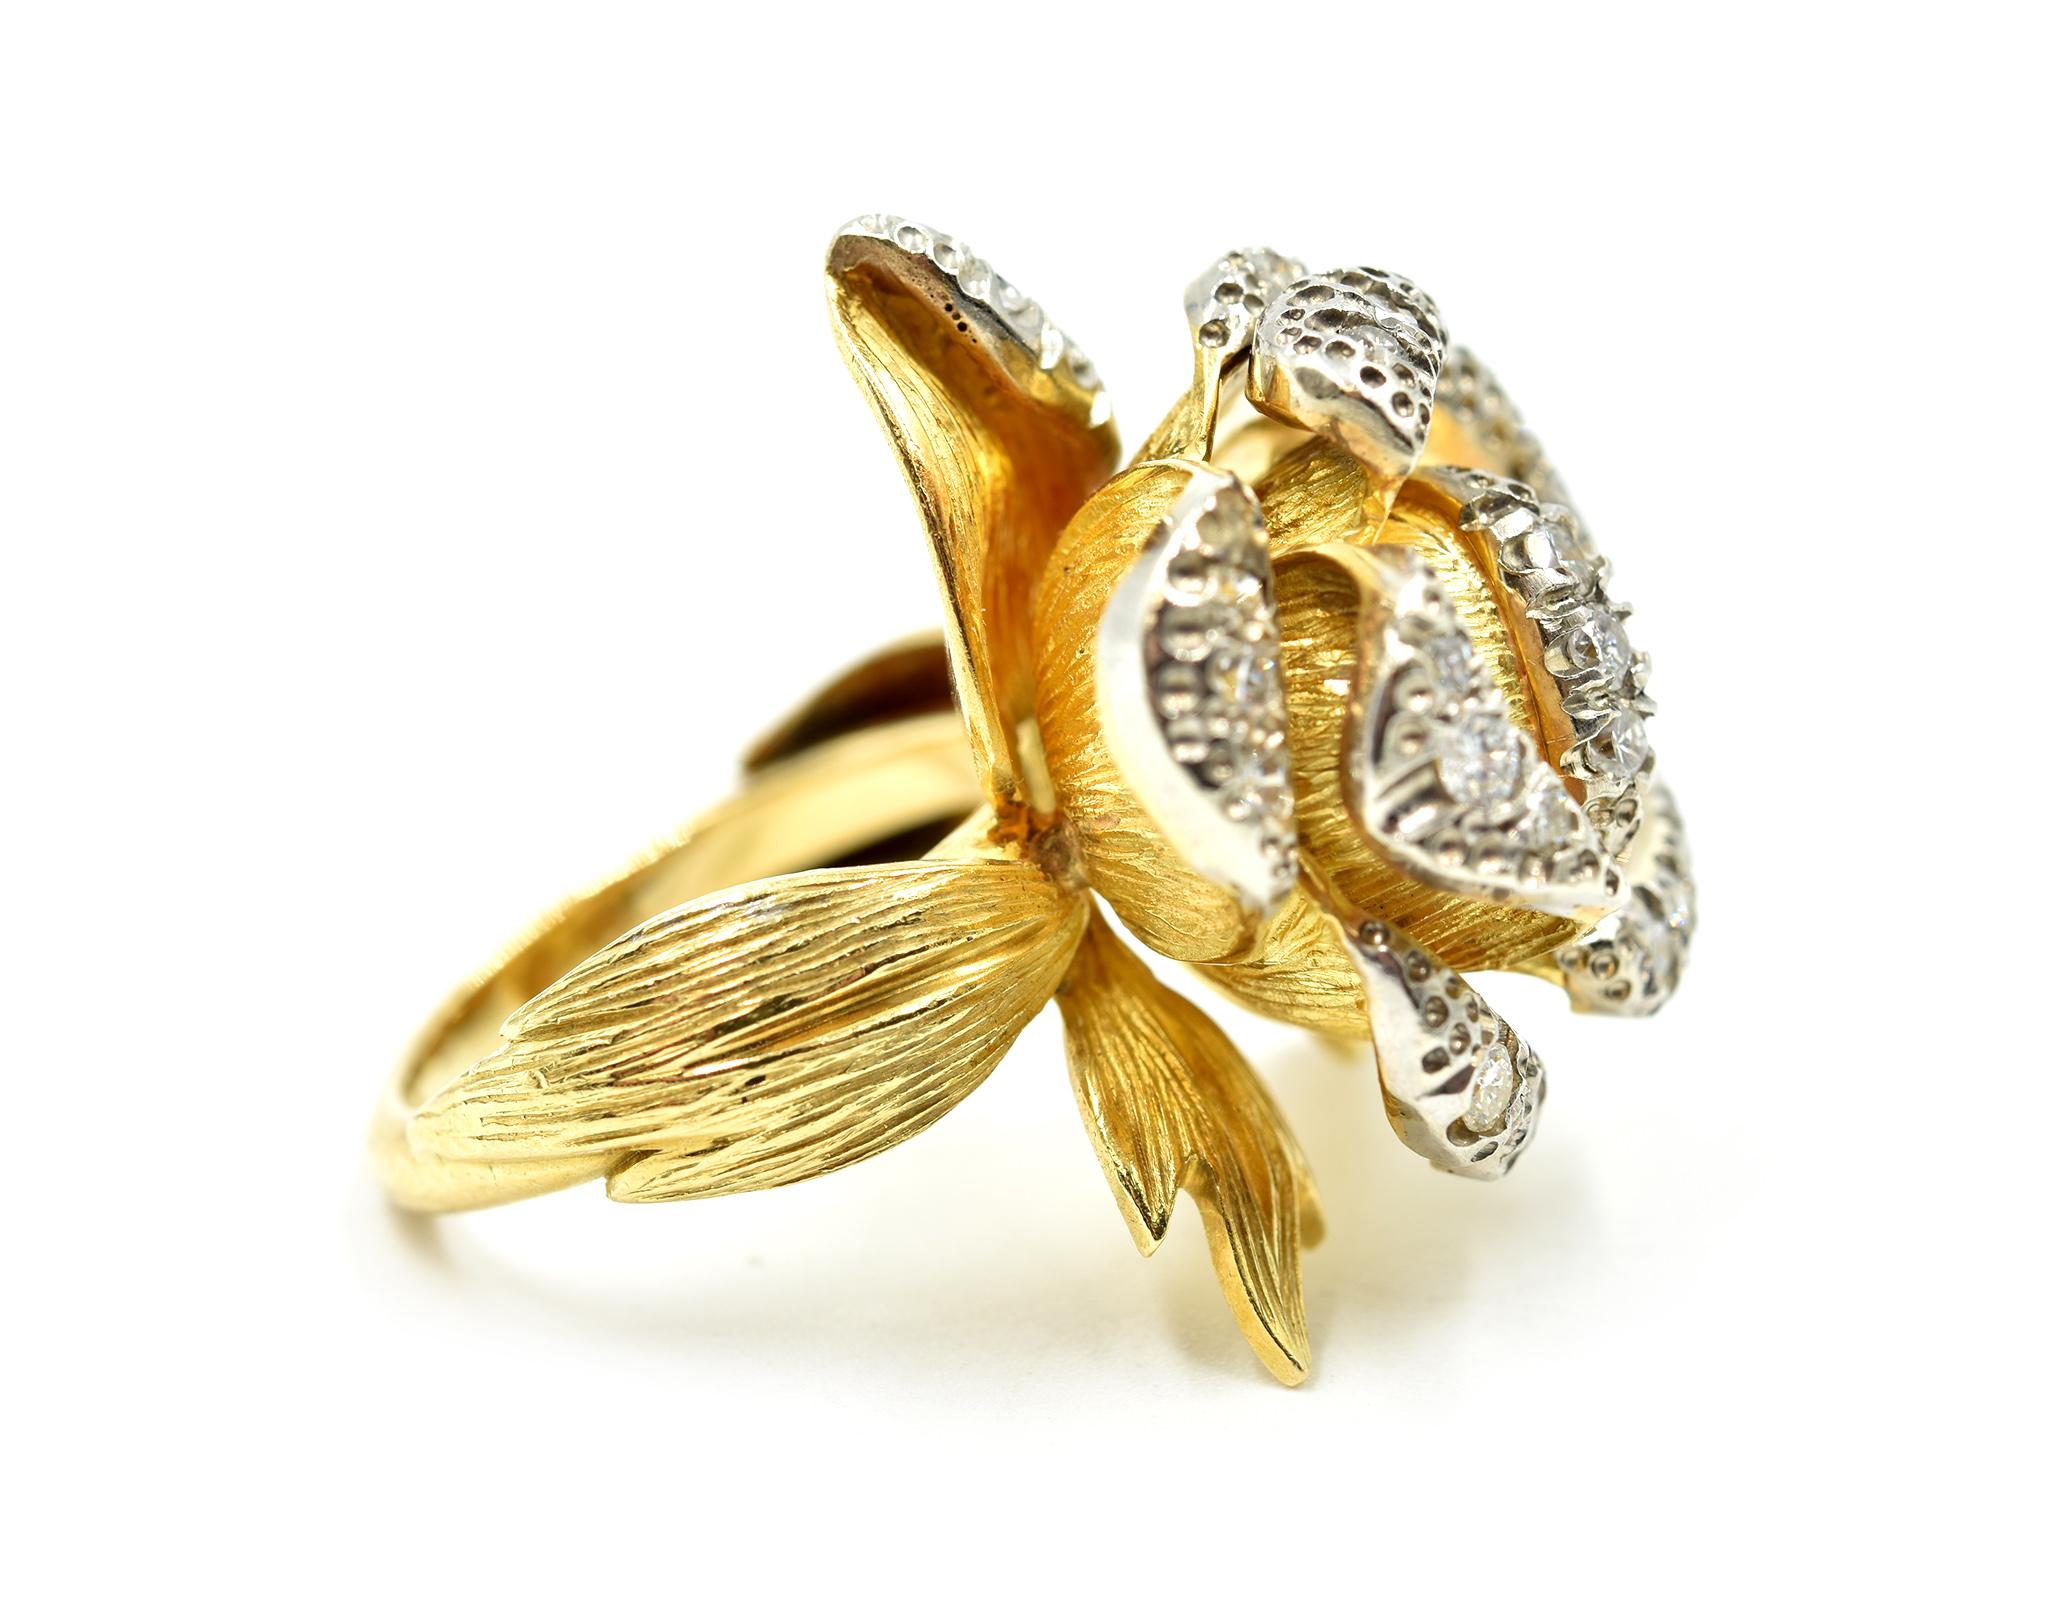 Intricately crafted to become a beauty! This elegant flower cocktail ring is made in 18k yellow gold with round diamonds prong set on top! Diamonds total to 20 stones and carat weight is 0.50 carats. The top of the flower cocktail ring measures